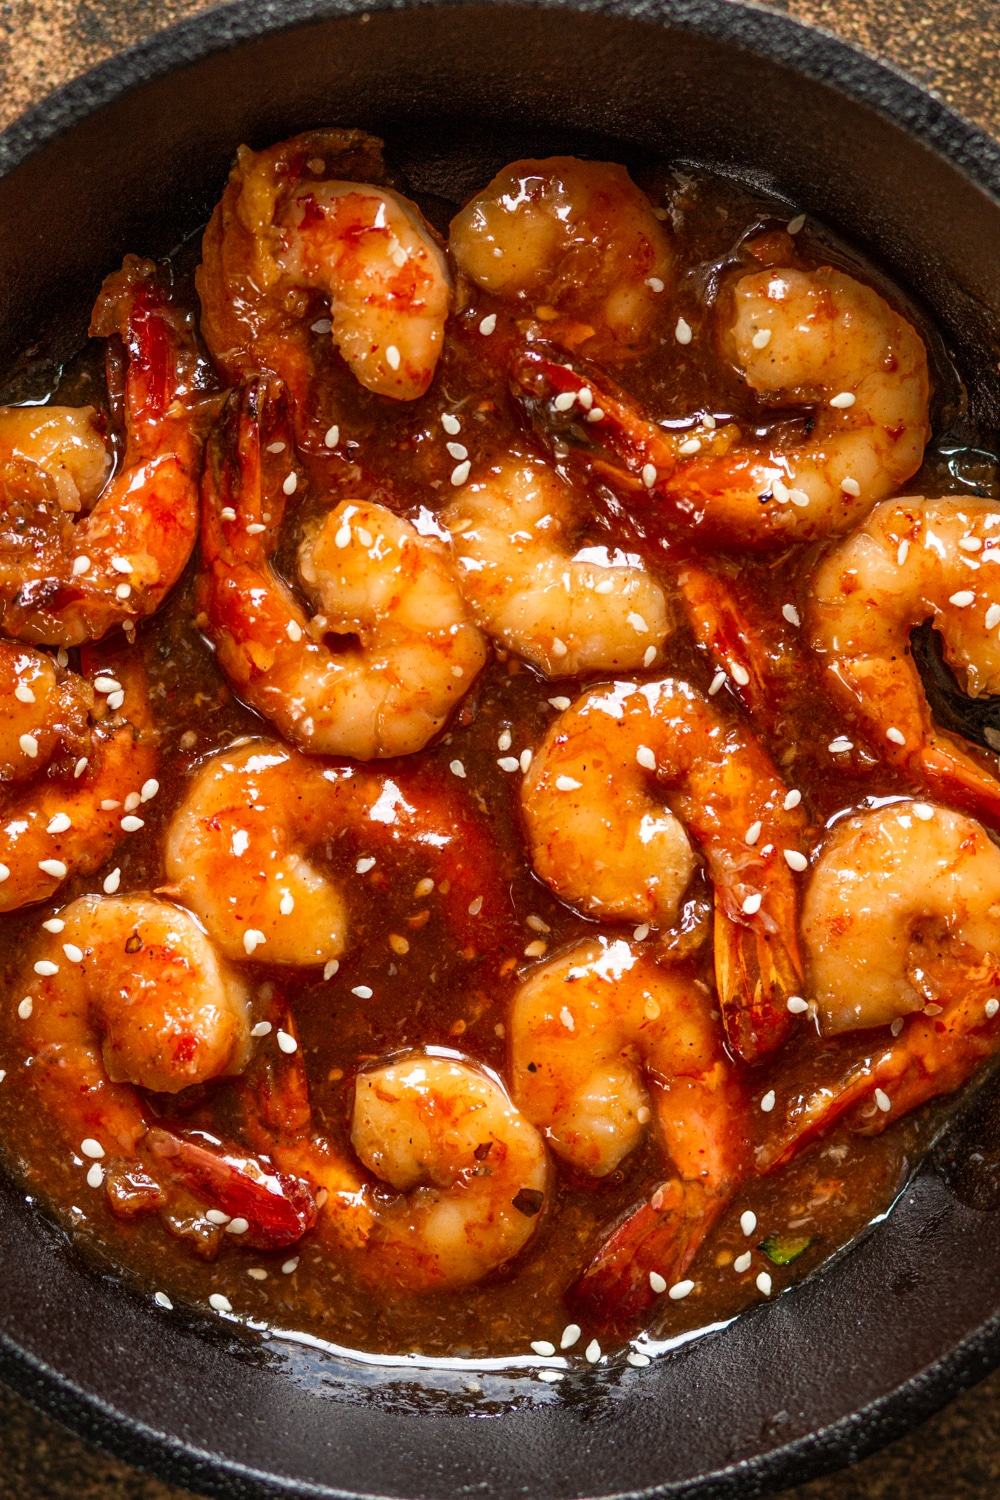 A close up overhead view of several pieces of shrimp in a skillet covered in firecracker sauce. There are sesame seeds scattered on the shrimp and in the sauce.